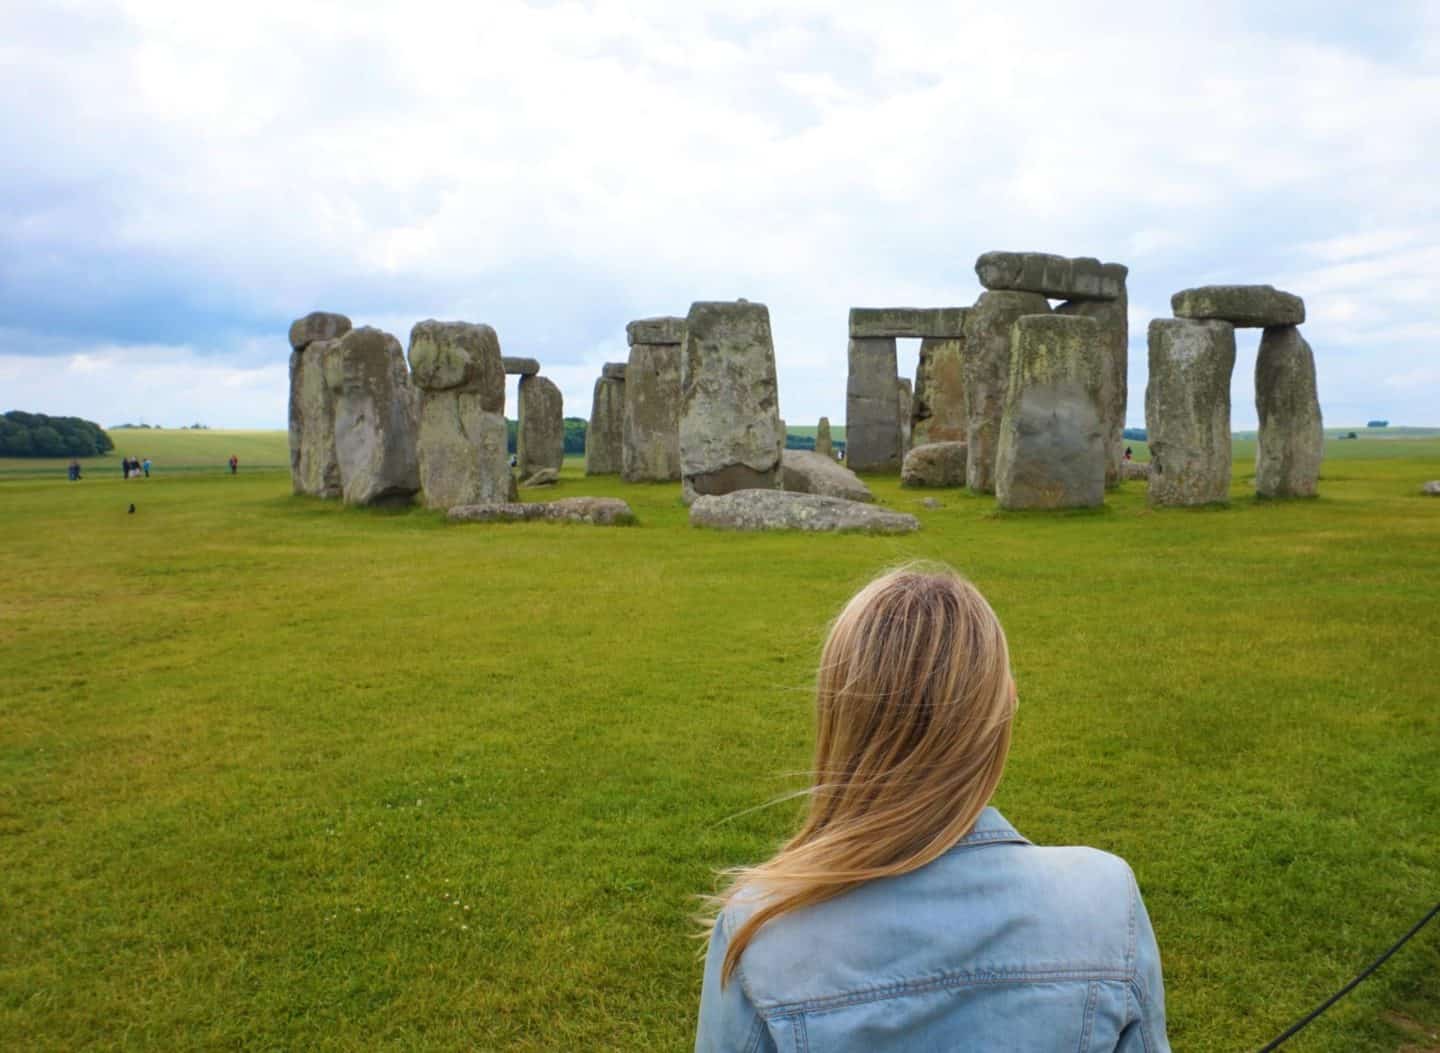 ellie quinn infront of stonehenge on a rainy and cloudy day